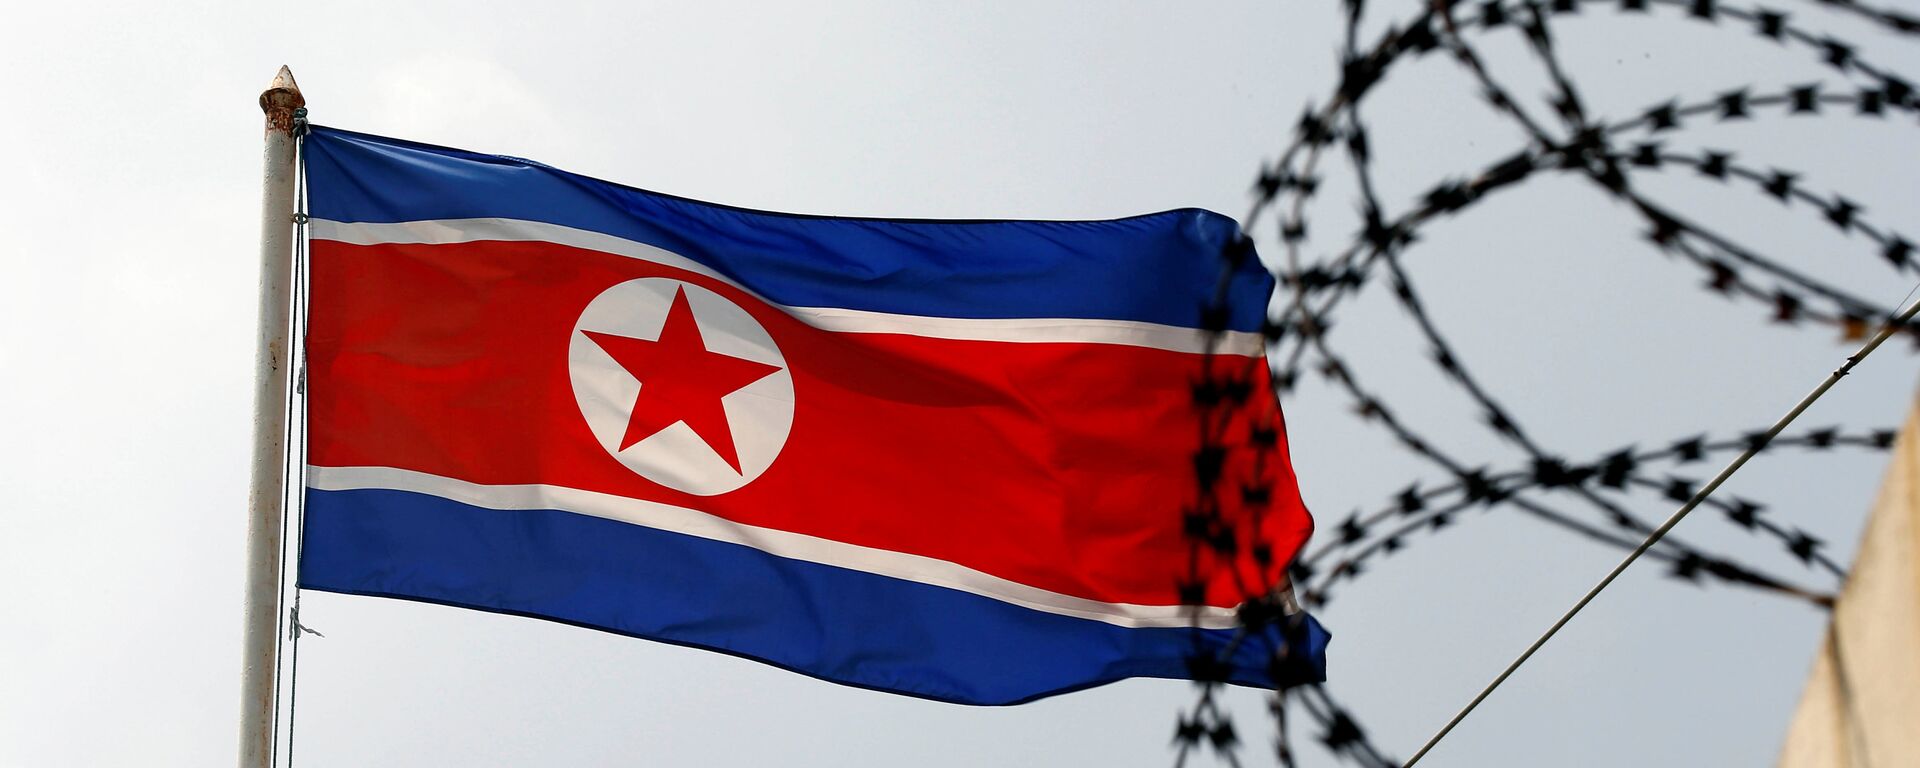 The North Korea flag flutters next to concertina wire at the North Korean embassy in Kuala Lumpur, Malaysia March 9, 2017 - Sputnik Mundo, 1920, 19.04.2021